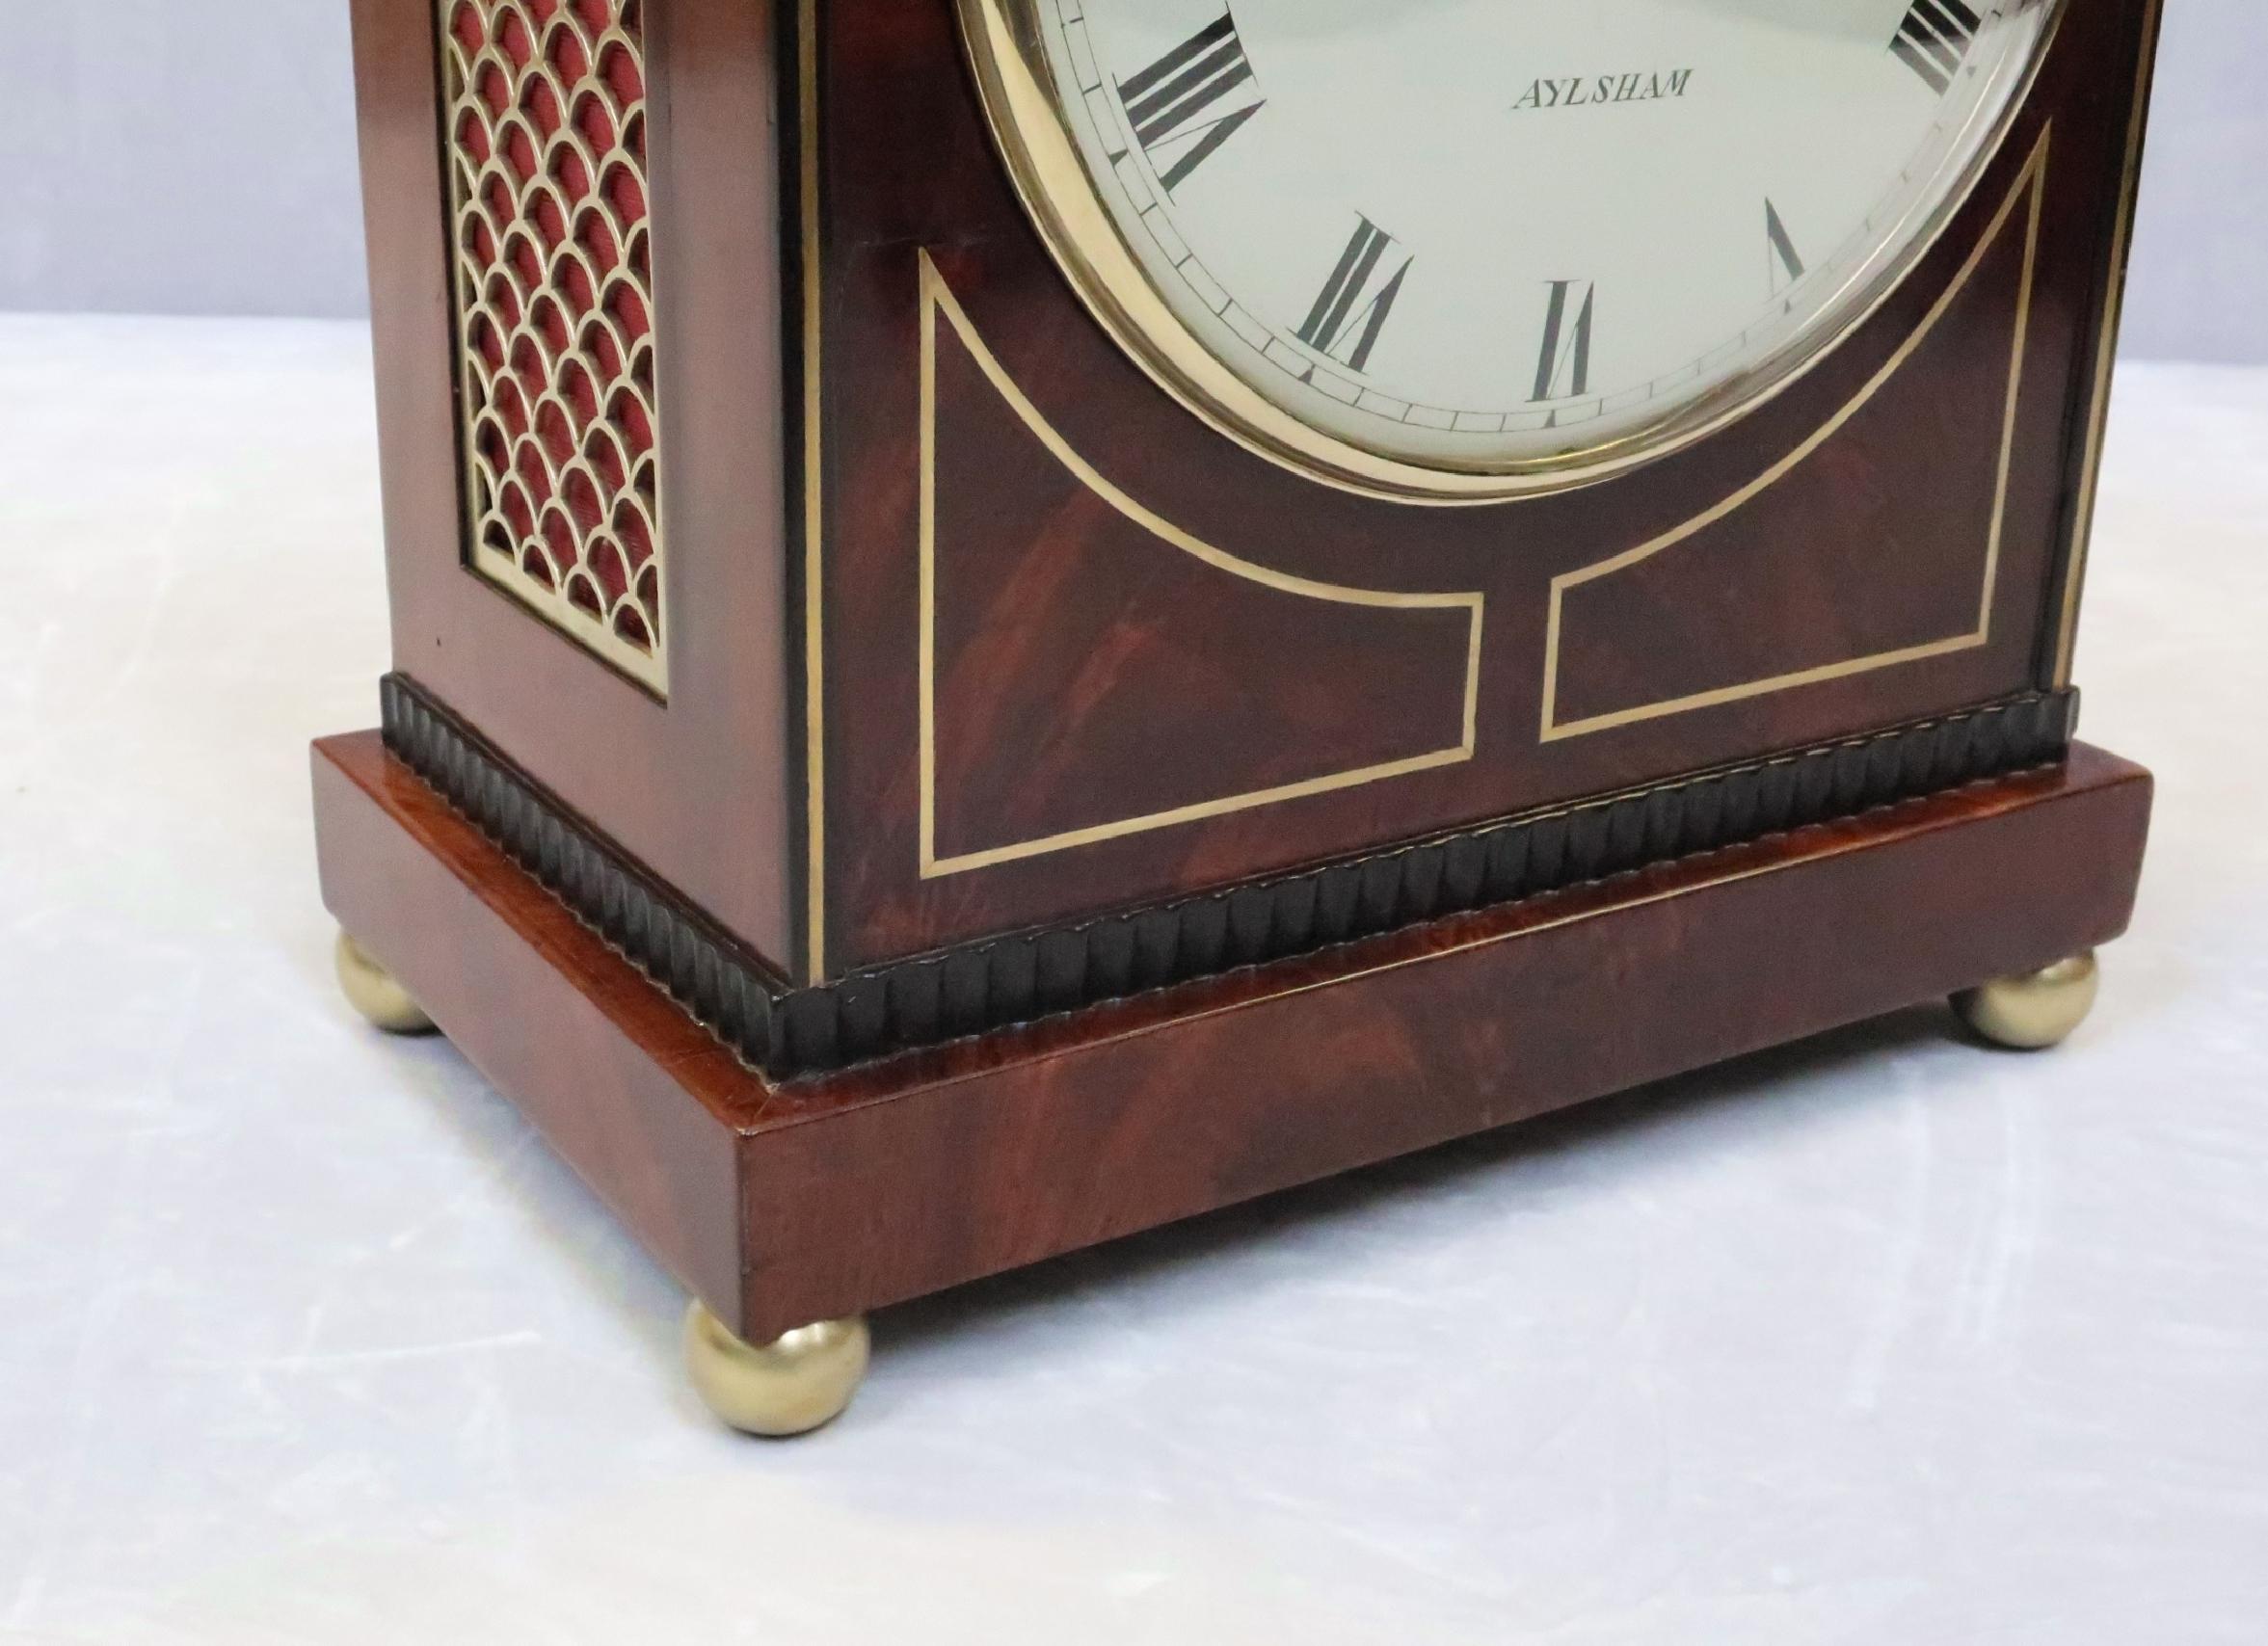 English Regency Figured Mahogany Bracket Clock by Thomas Connald In Good Condition For Sale In Macclesfield, GB